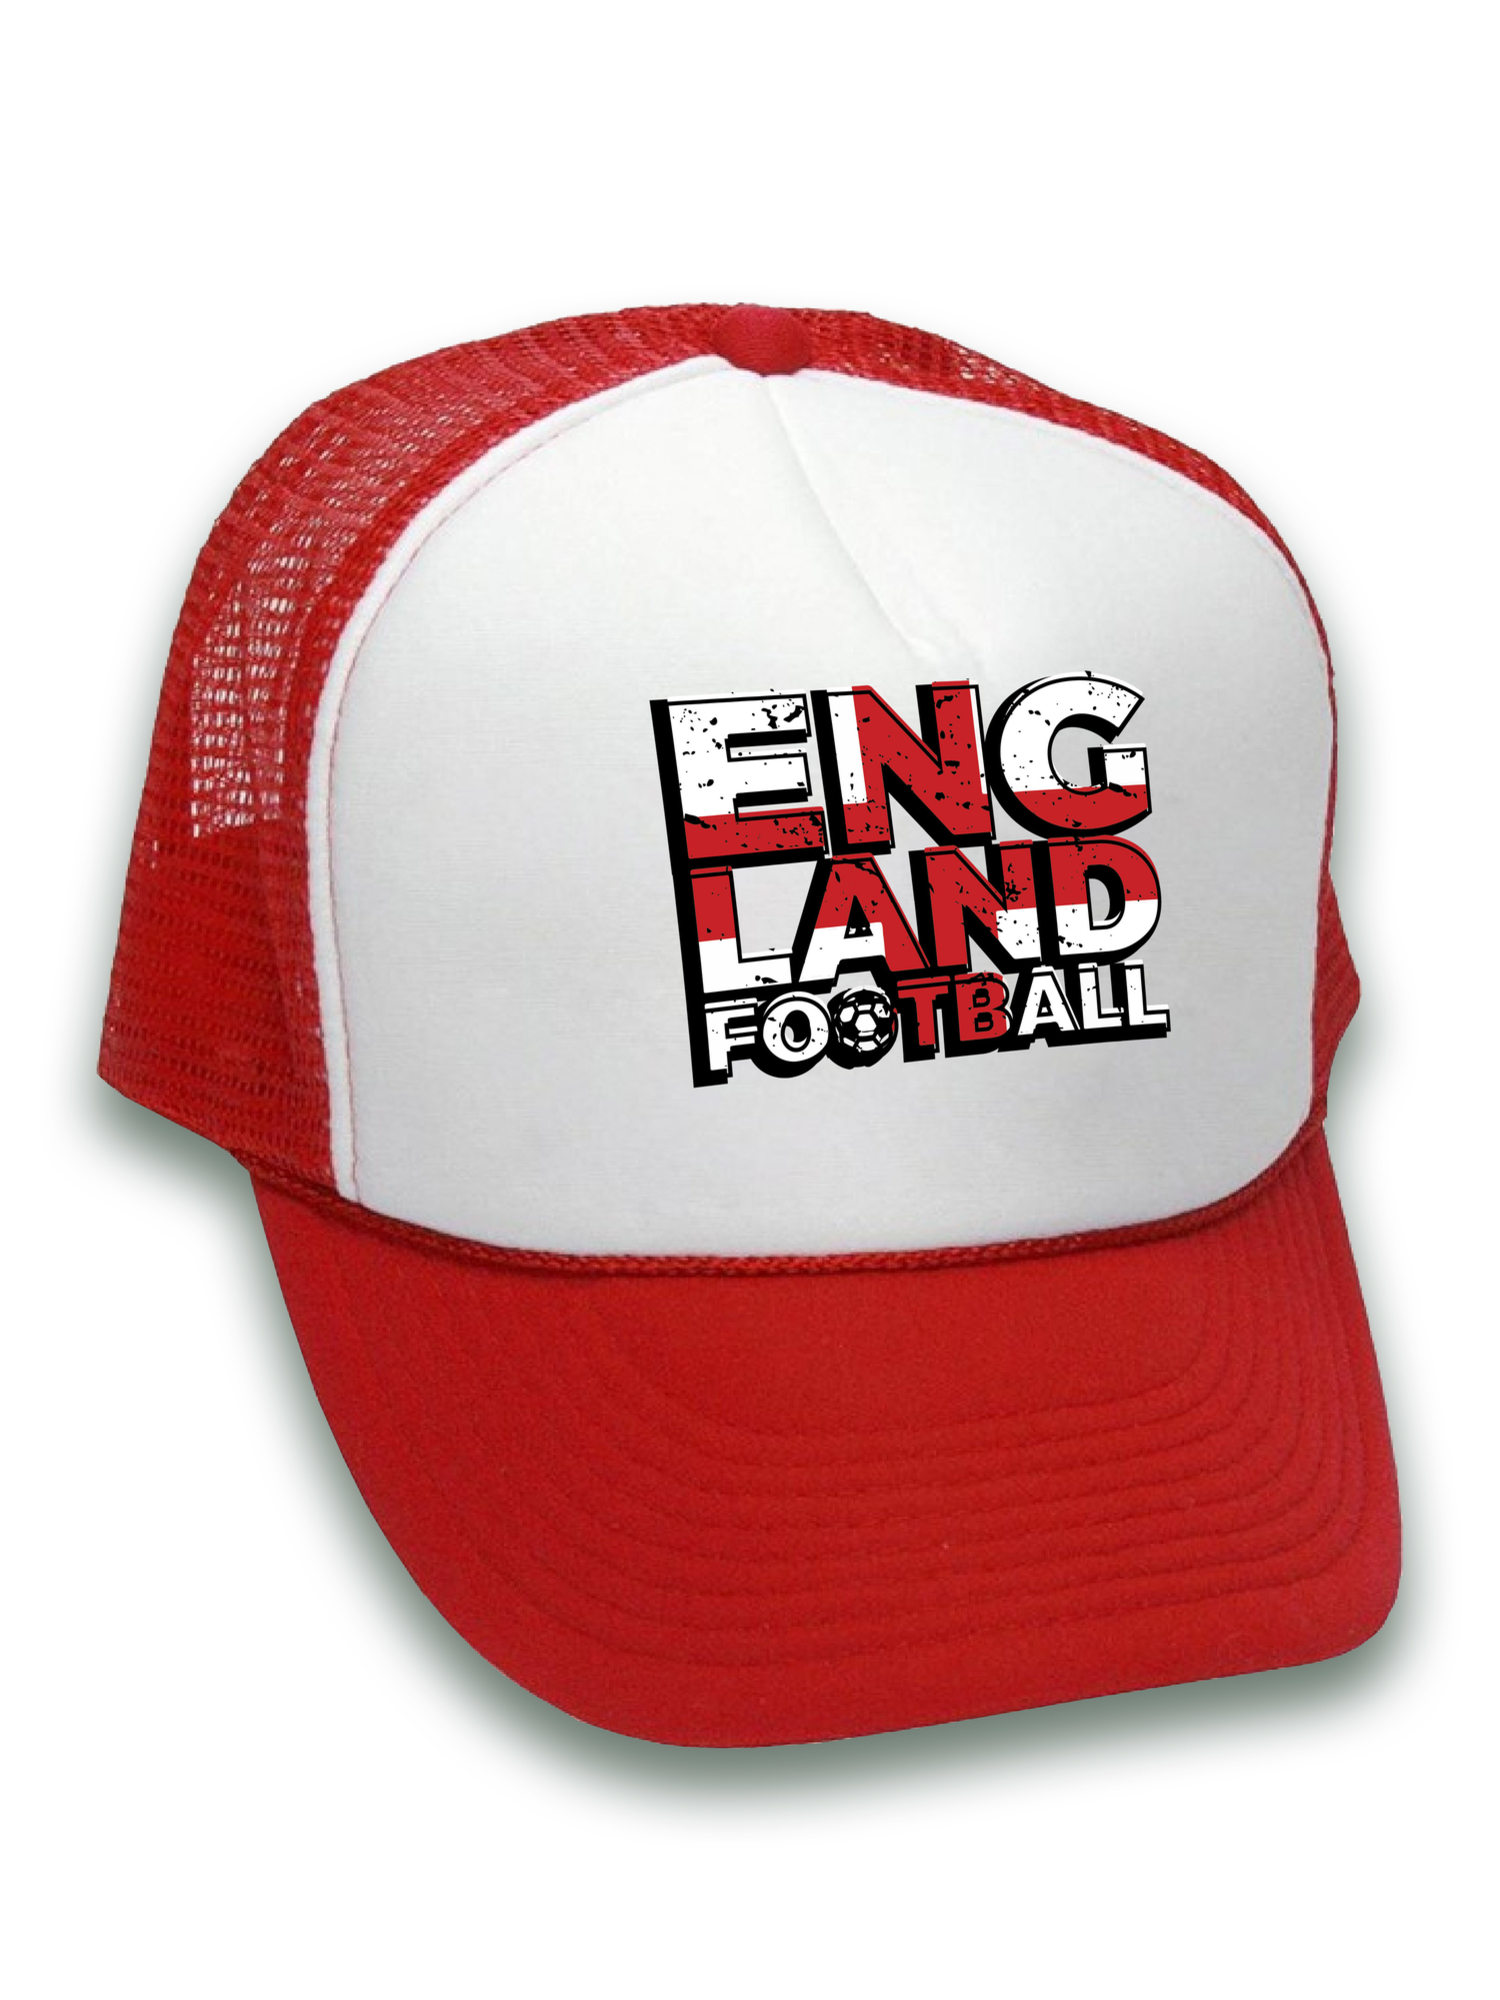 Awkward Styles England Football Hat England Trucker Hats for Men and Women Hat Gifts from England English Soccer Cap English Hats Unisex England Snapback Hat England 2018 Trucker Hats English Soccer - image 2 of 6